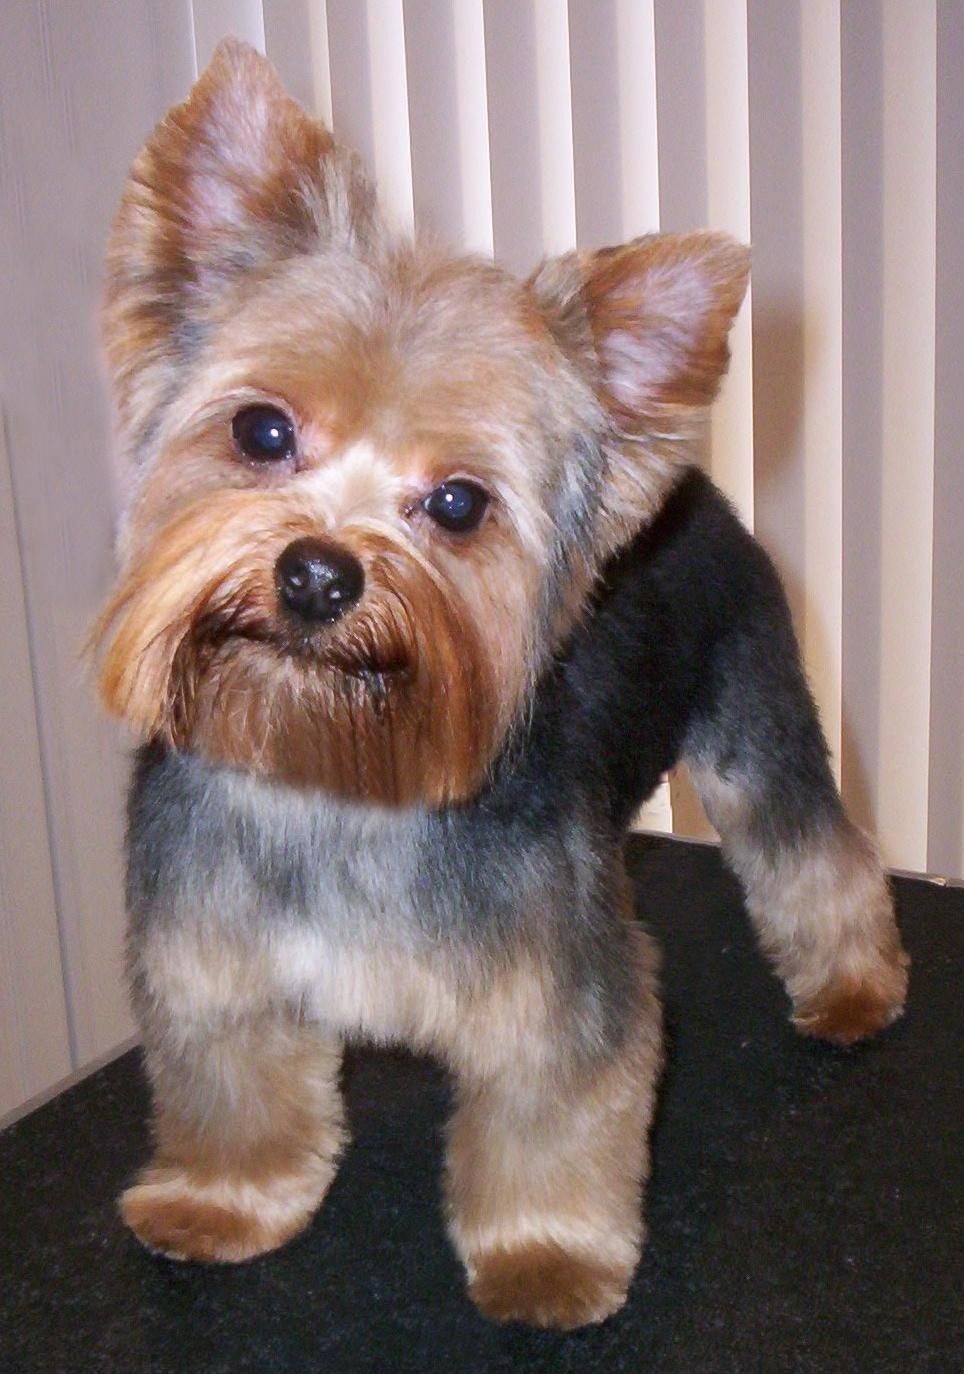 Image Result For Yorkie Teddy Bear Cut throughout Bear Cut For Yorkie